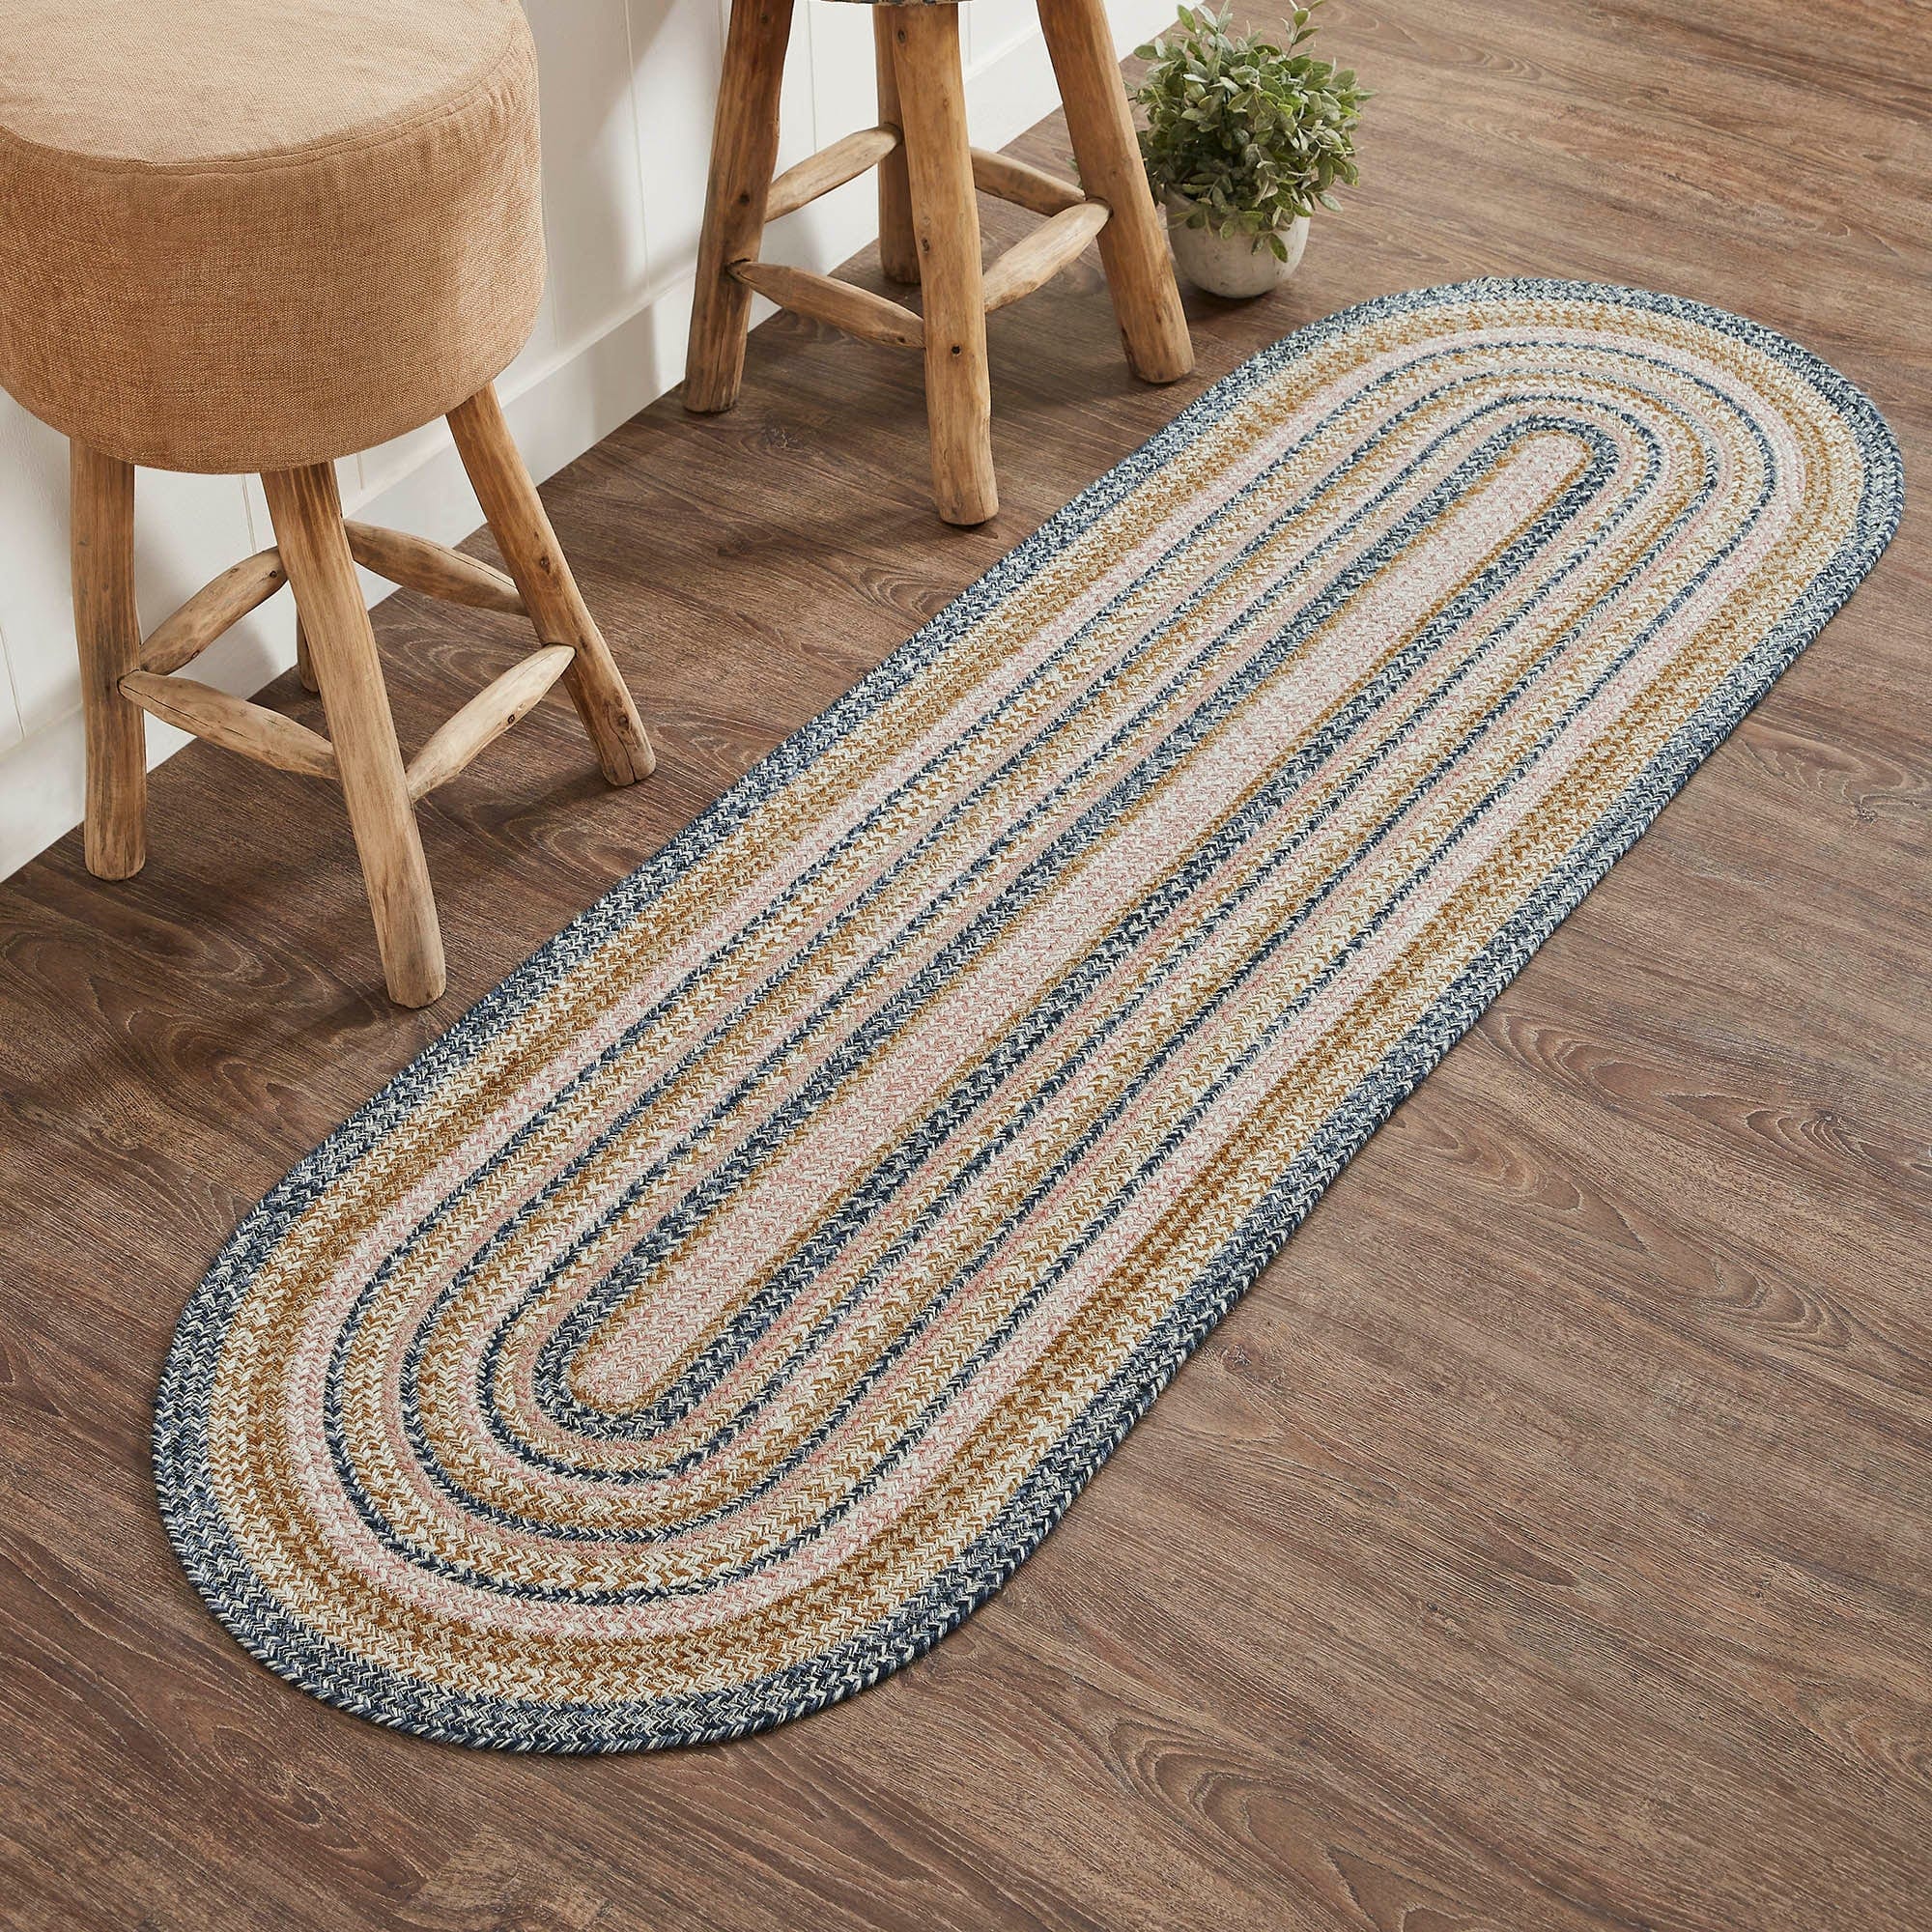 MISHRAN Oval Rug Braid Hand Woven with Recycled Fabric - Jute - L60 x W180